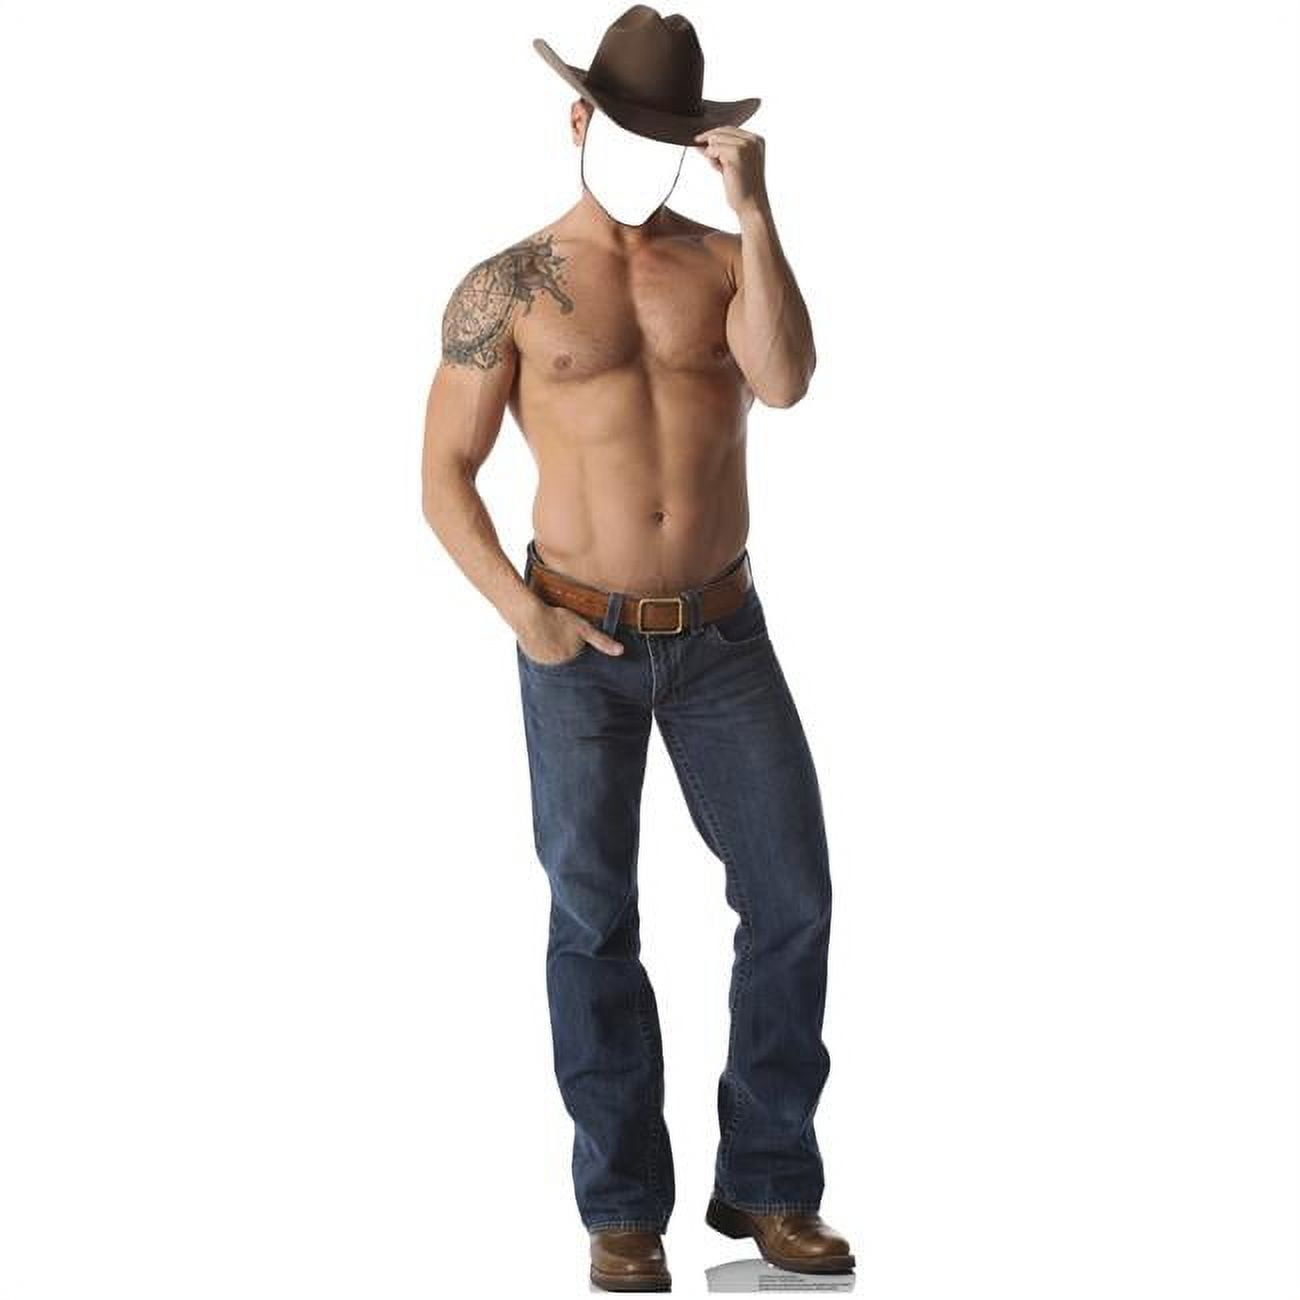 Picture of Advanced Graphics 1979 72 x 25 in. Shirtless Cowboy Standin Cardboard Standup